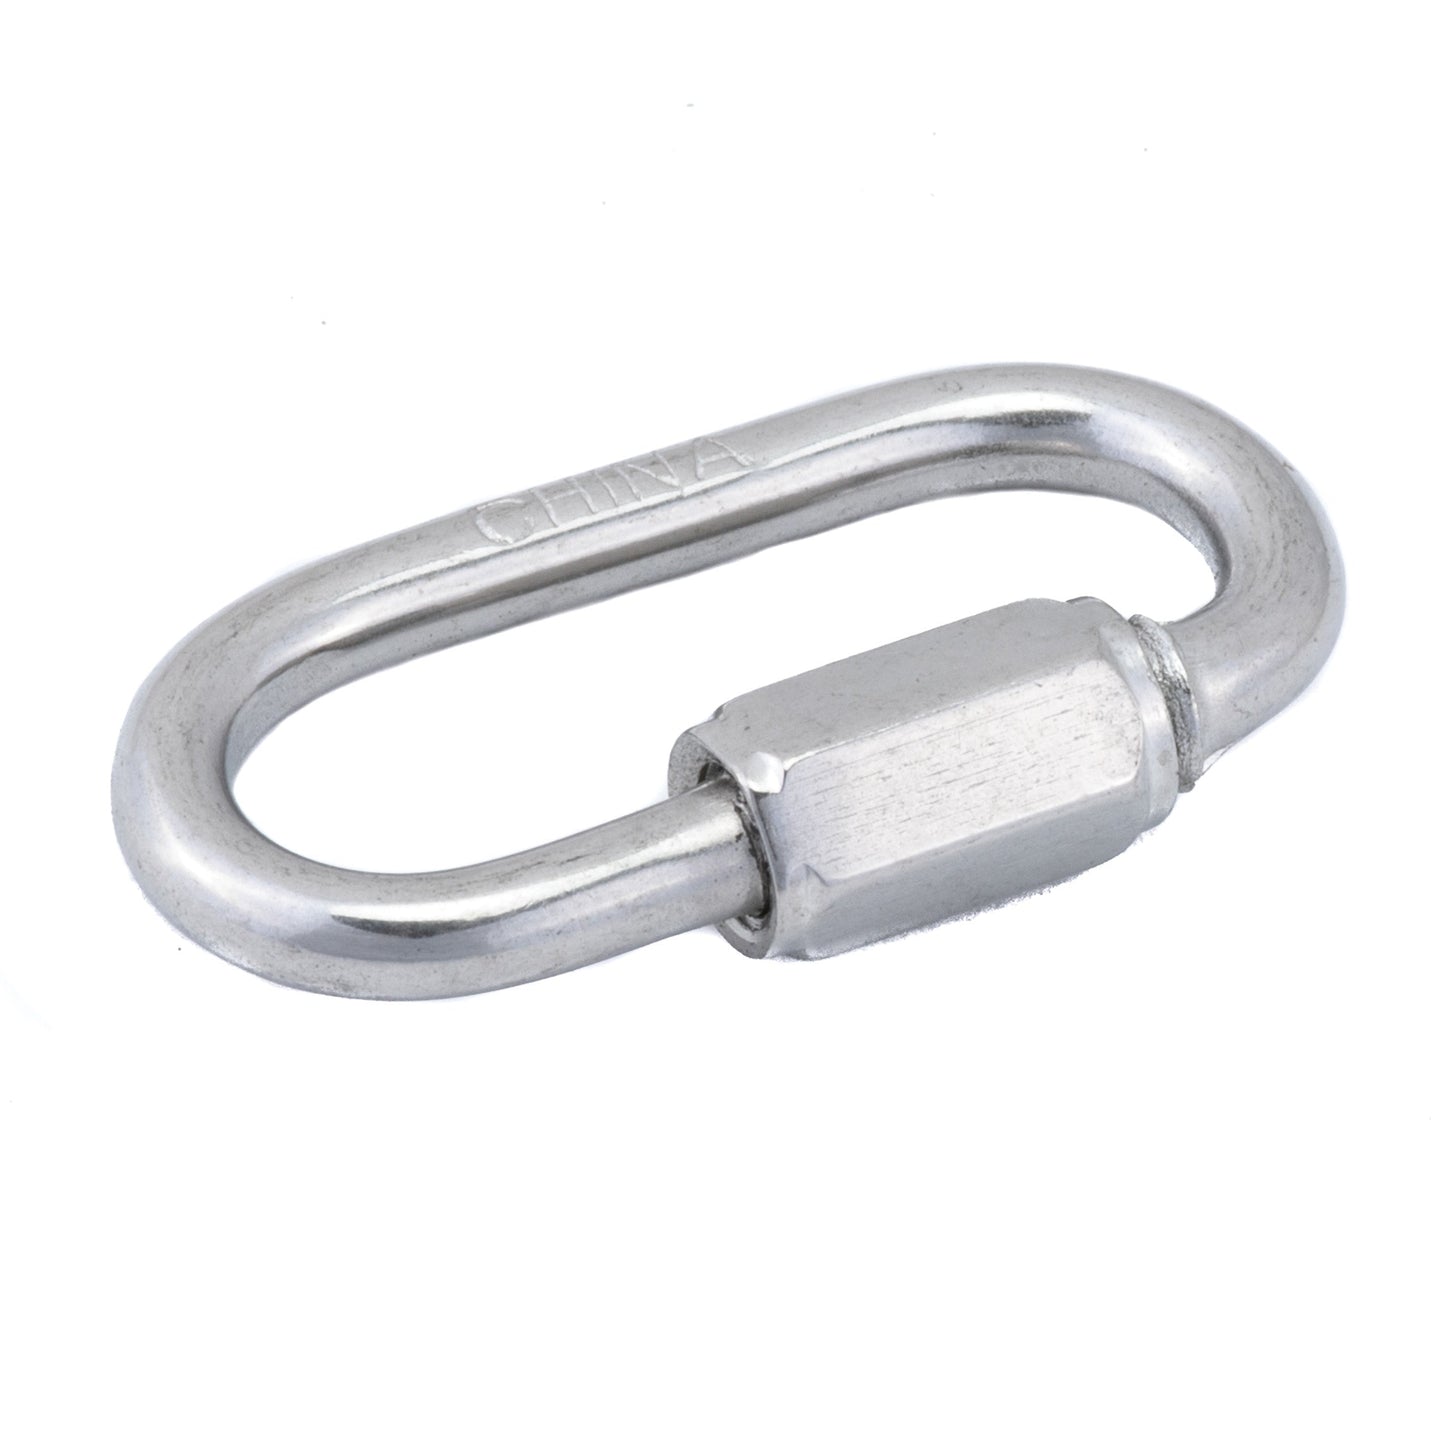 3-1/2" Stainless Steel Quick Link